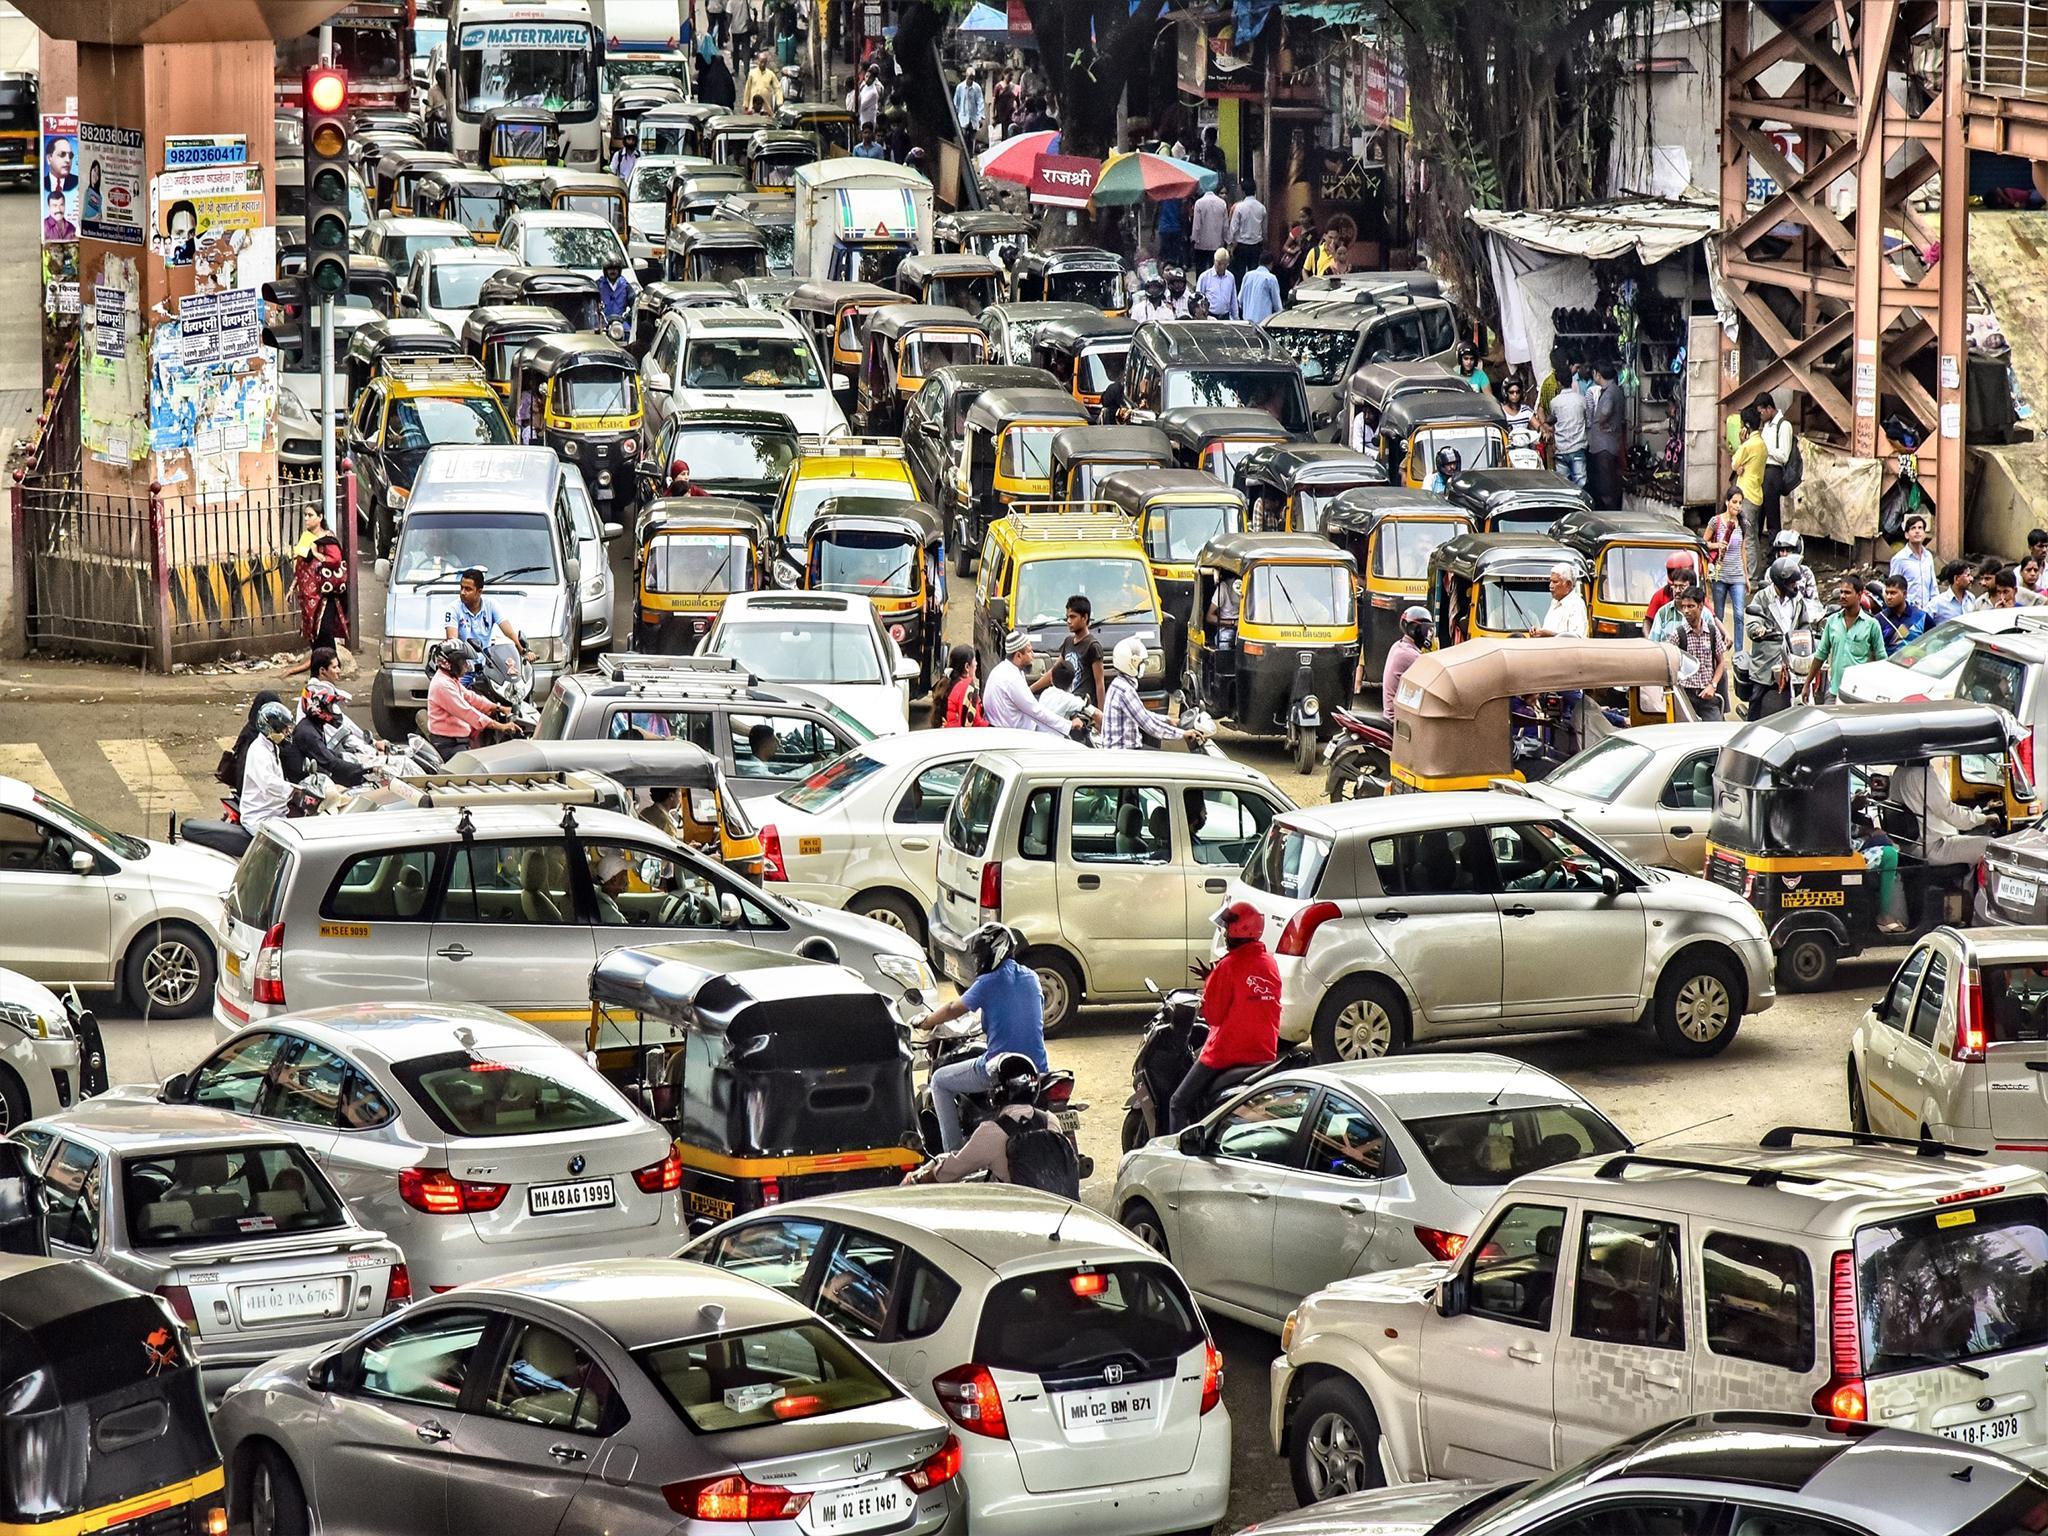 Mumbai is predicted to have a population of over 42m by the middle of the century